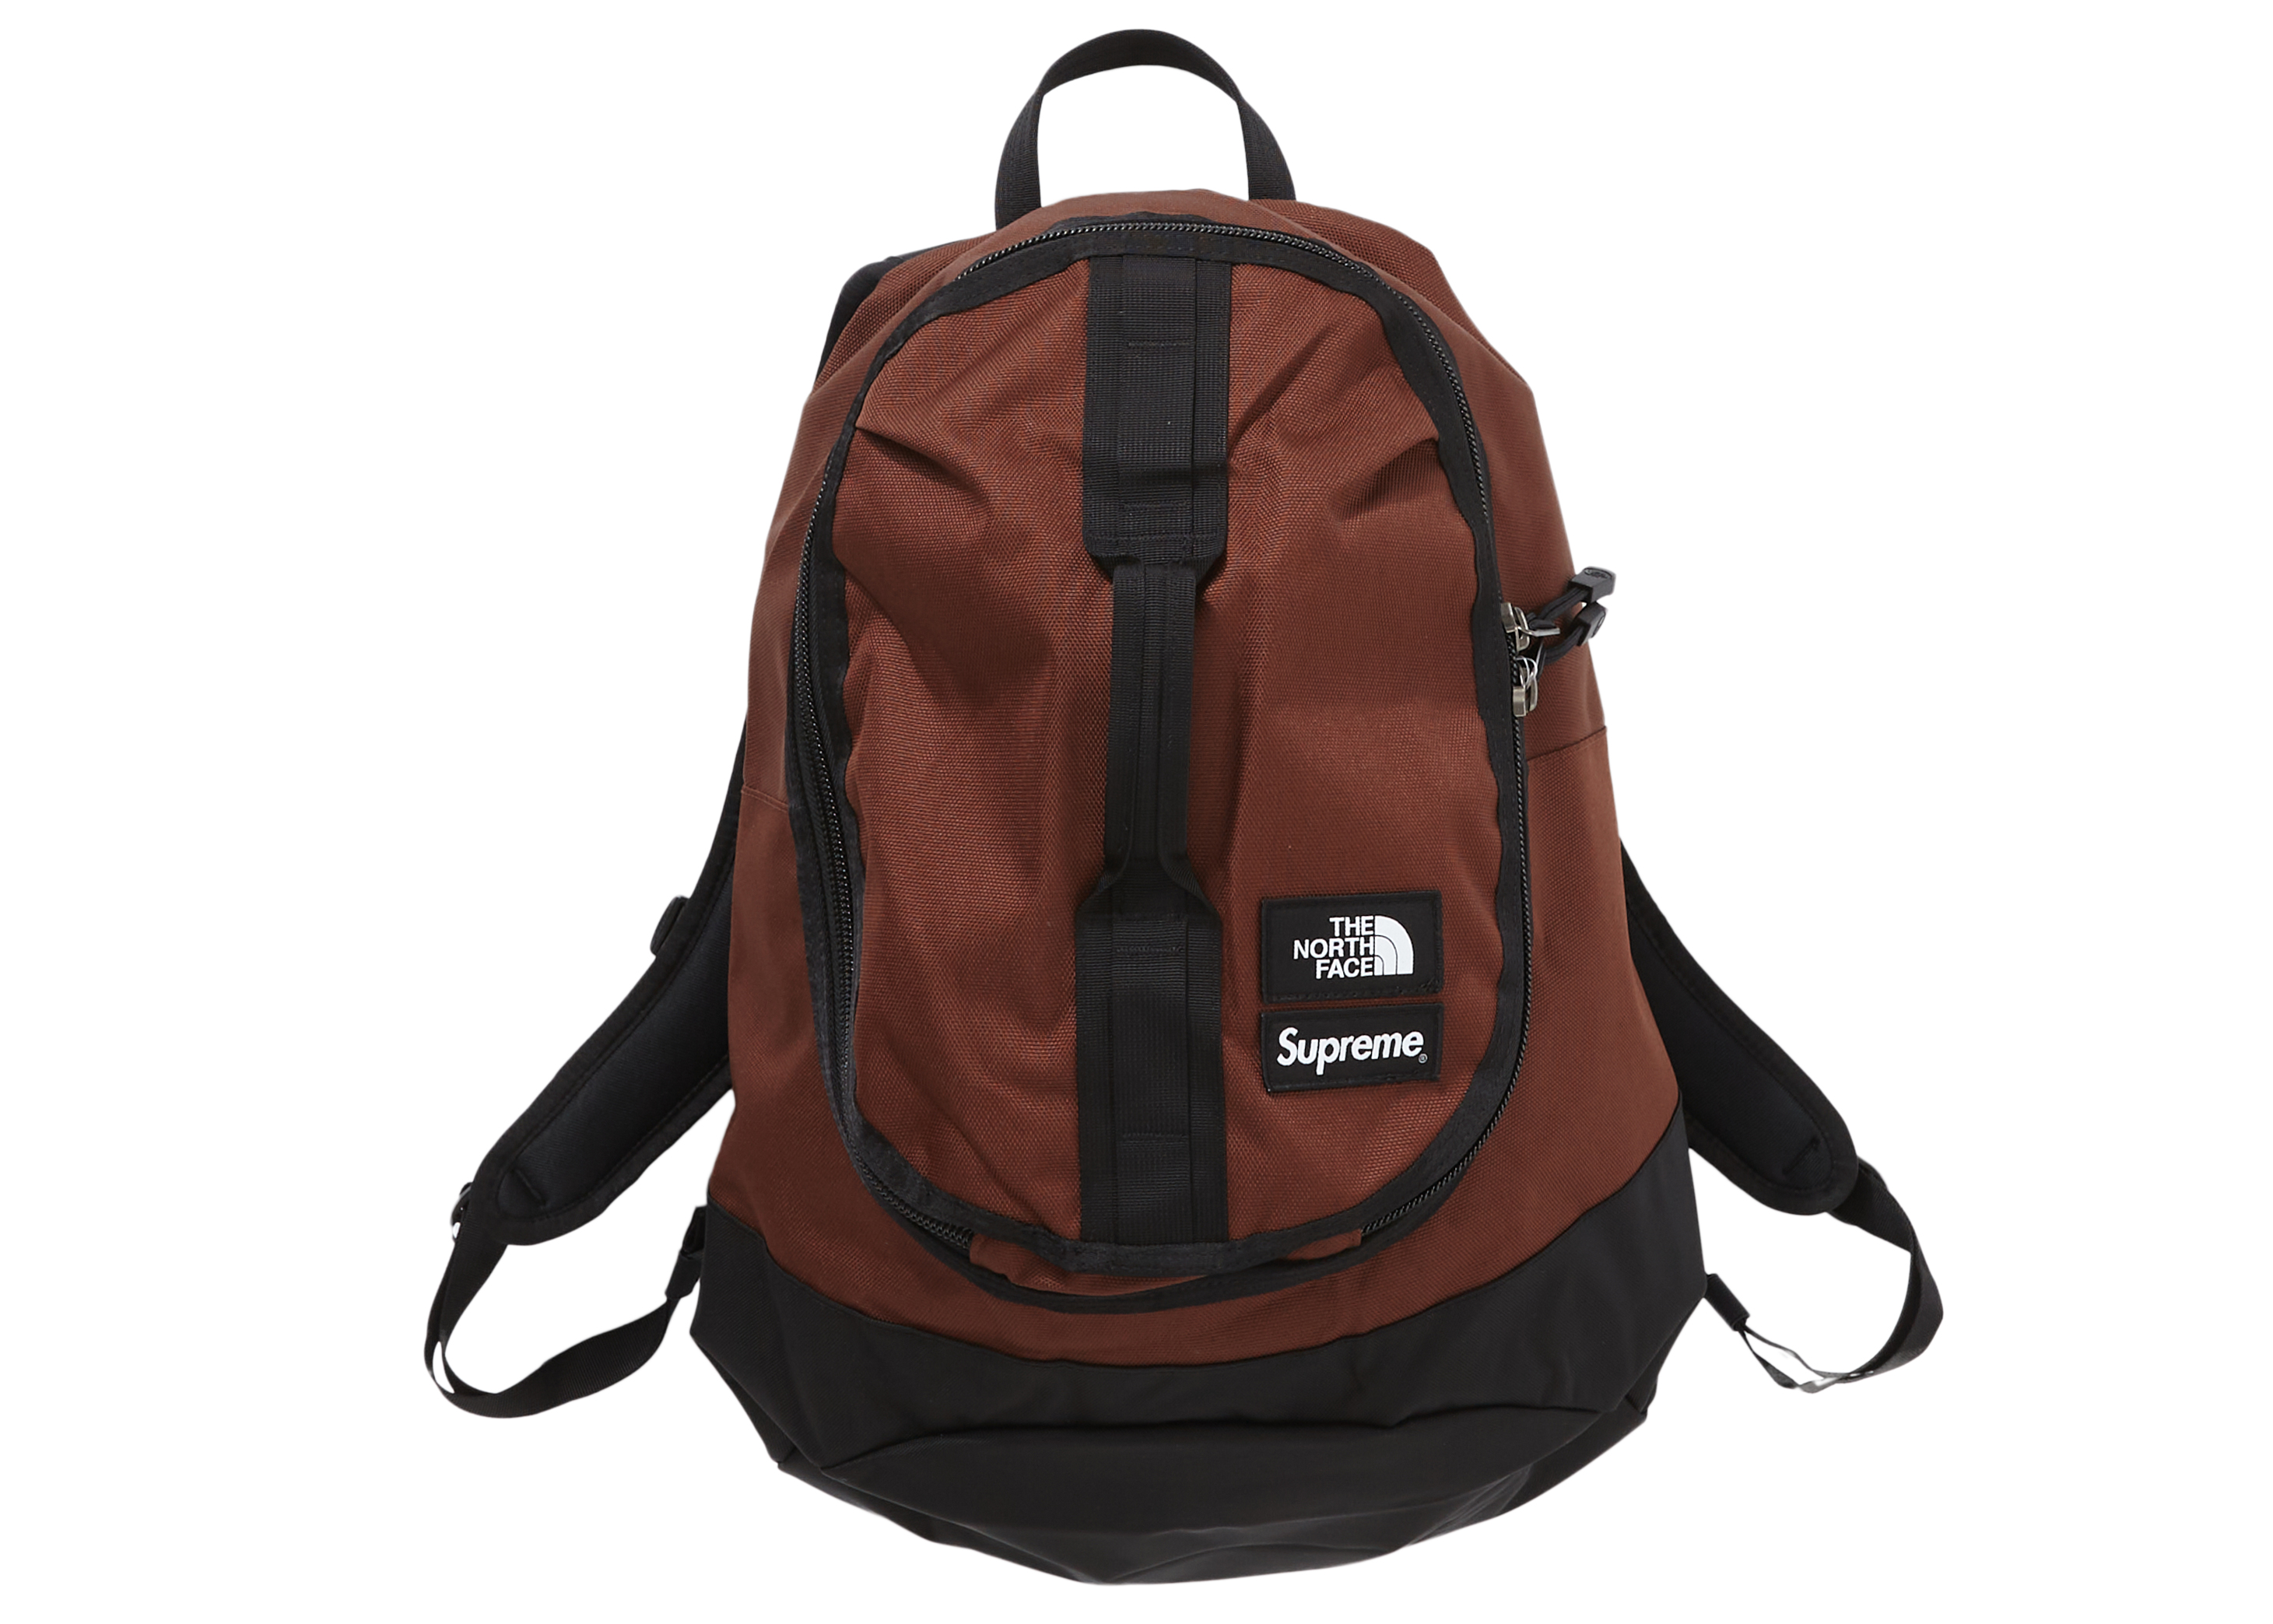 Supreme×North face 16AW Backpack